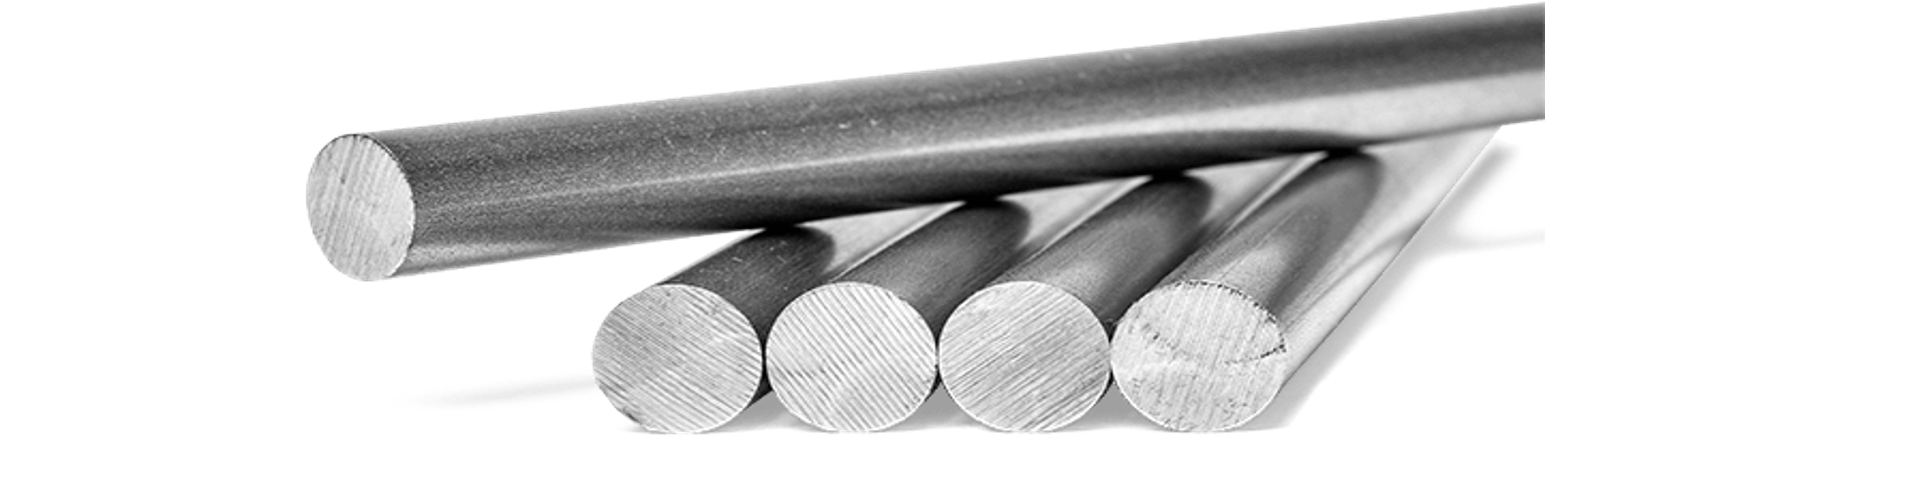  Stainless Steel 440A Round Bars<br />
